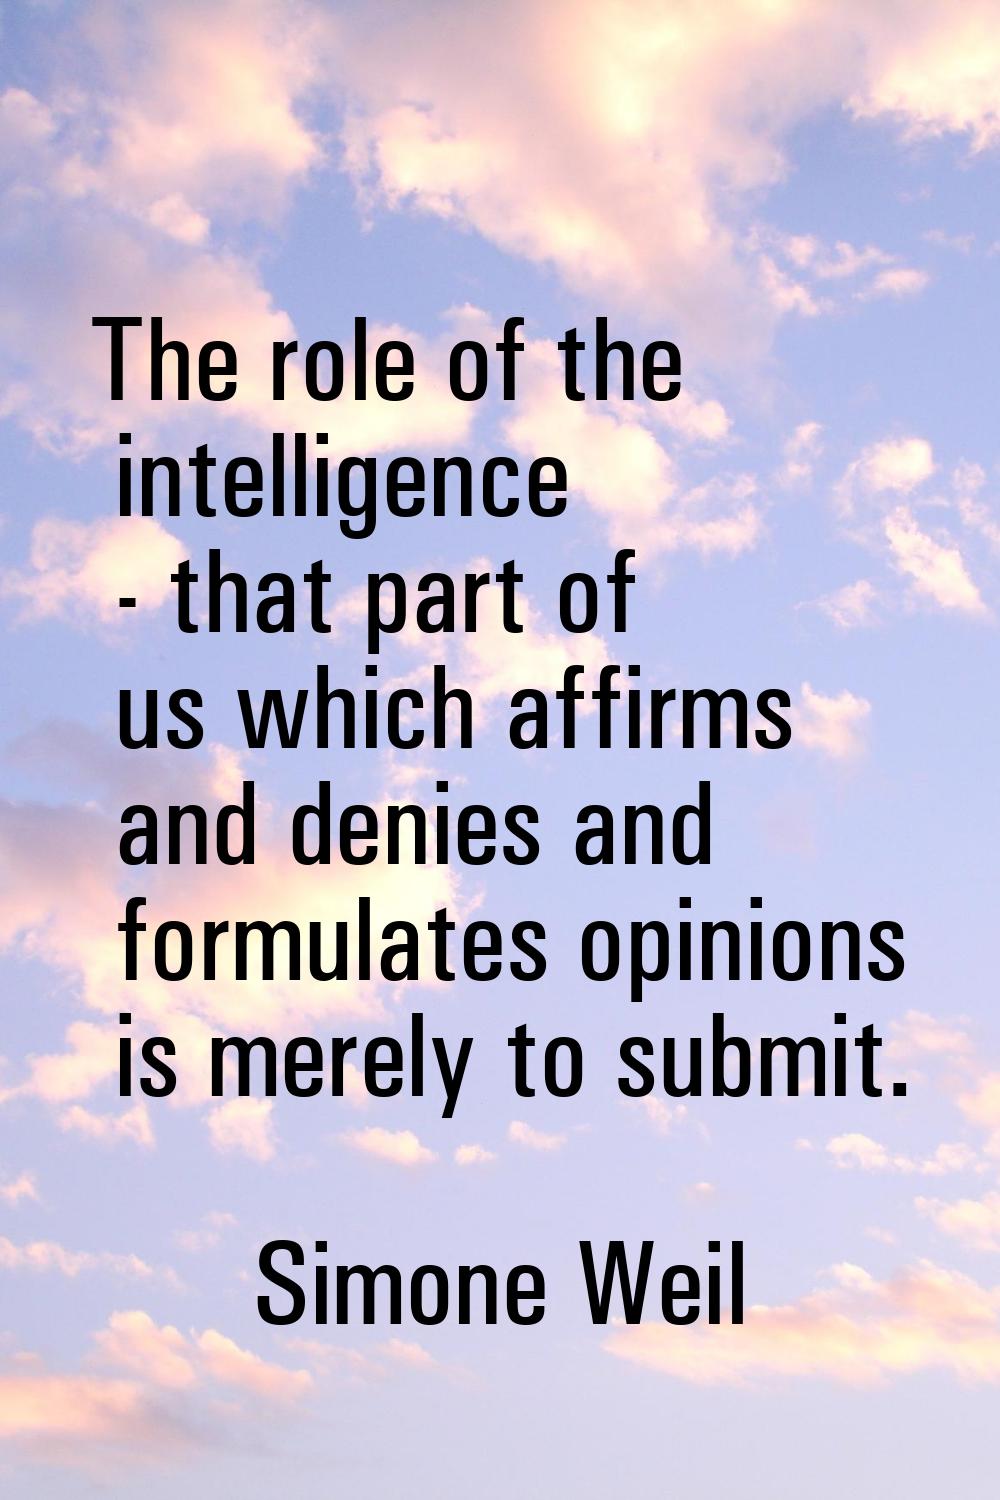 The role of the intelligence - that part of us which affirms and denies and formulates opinions is 